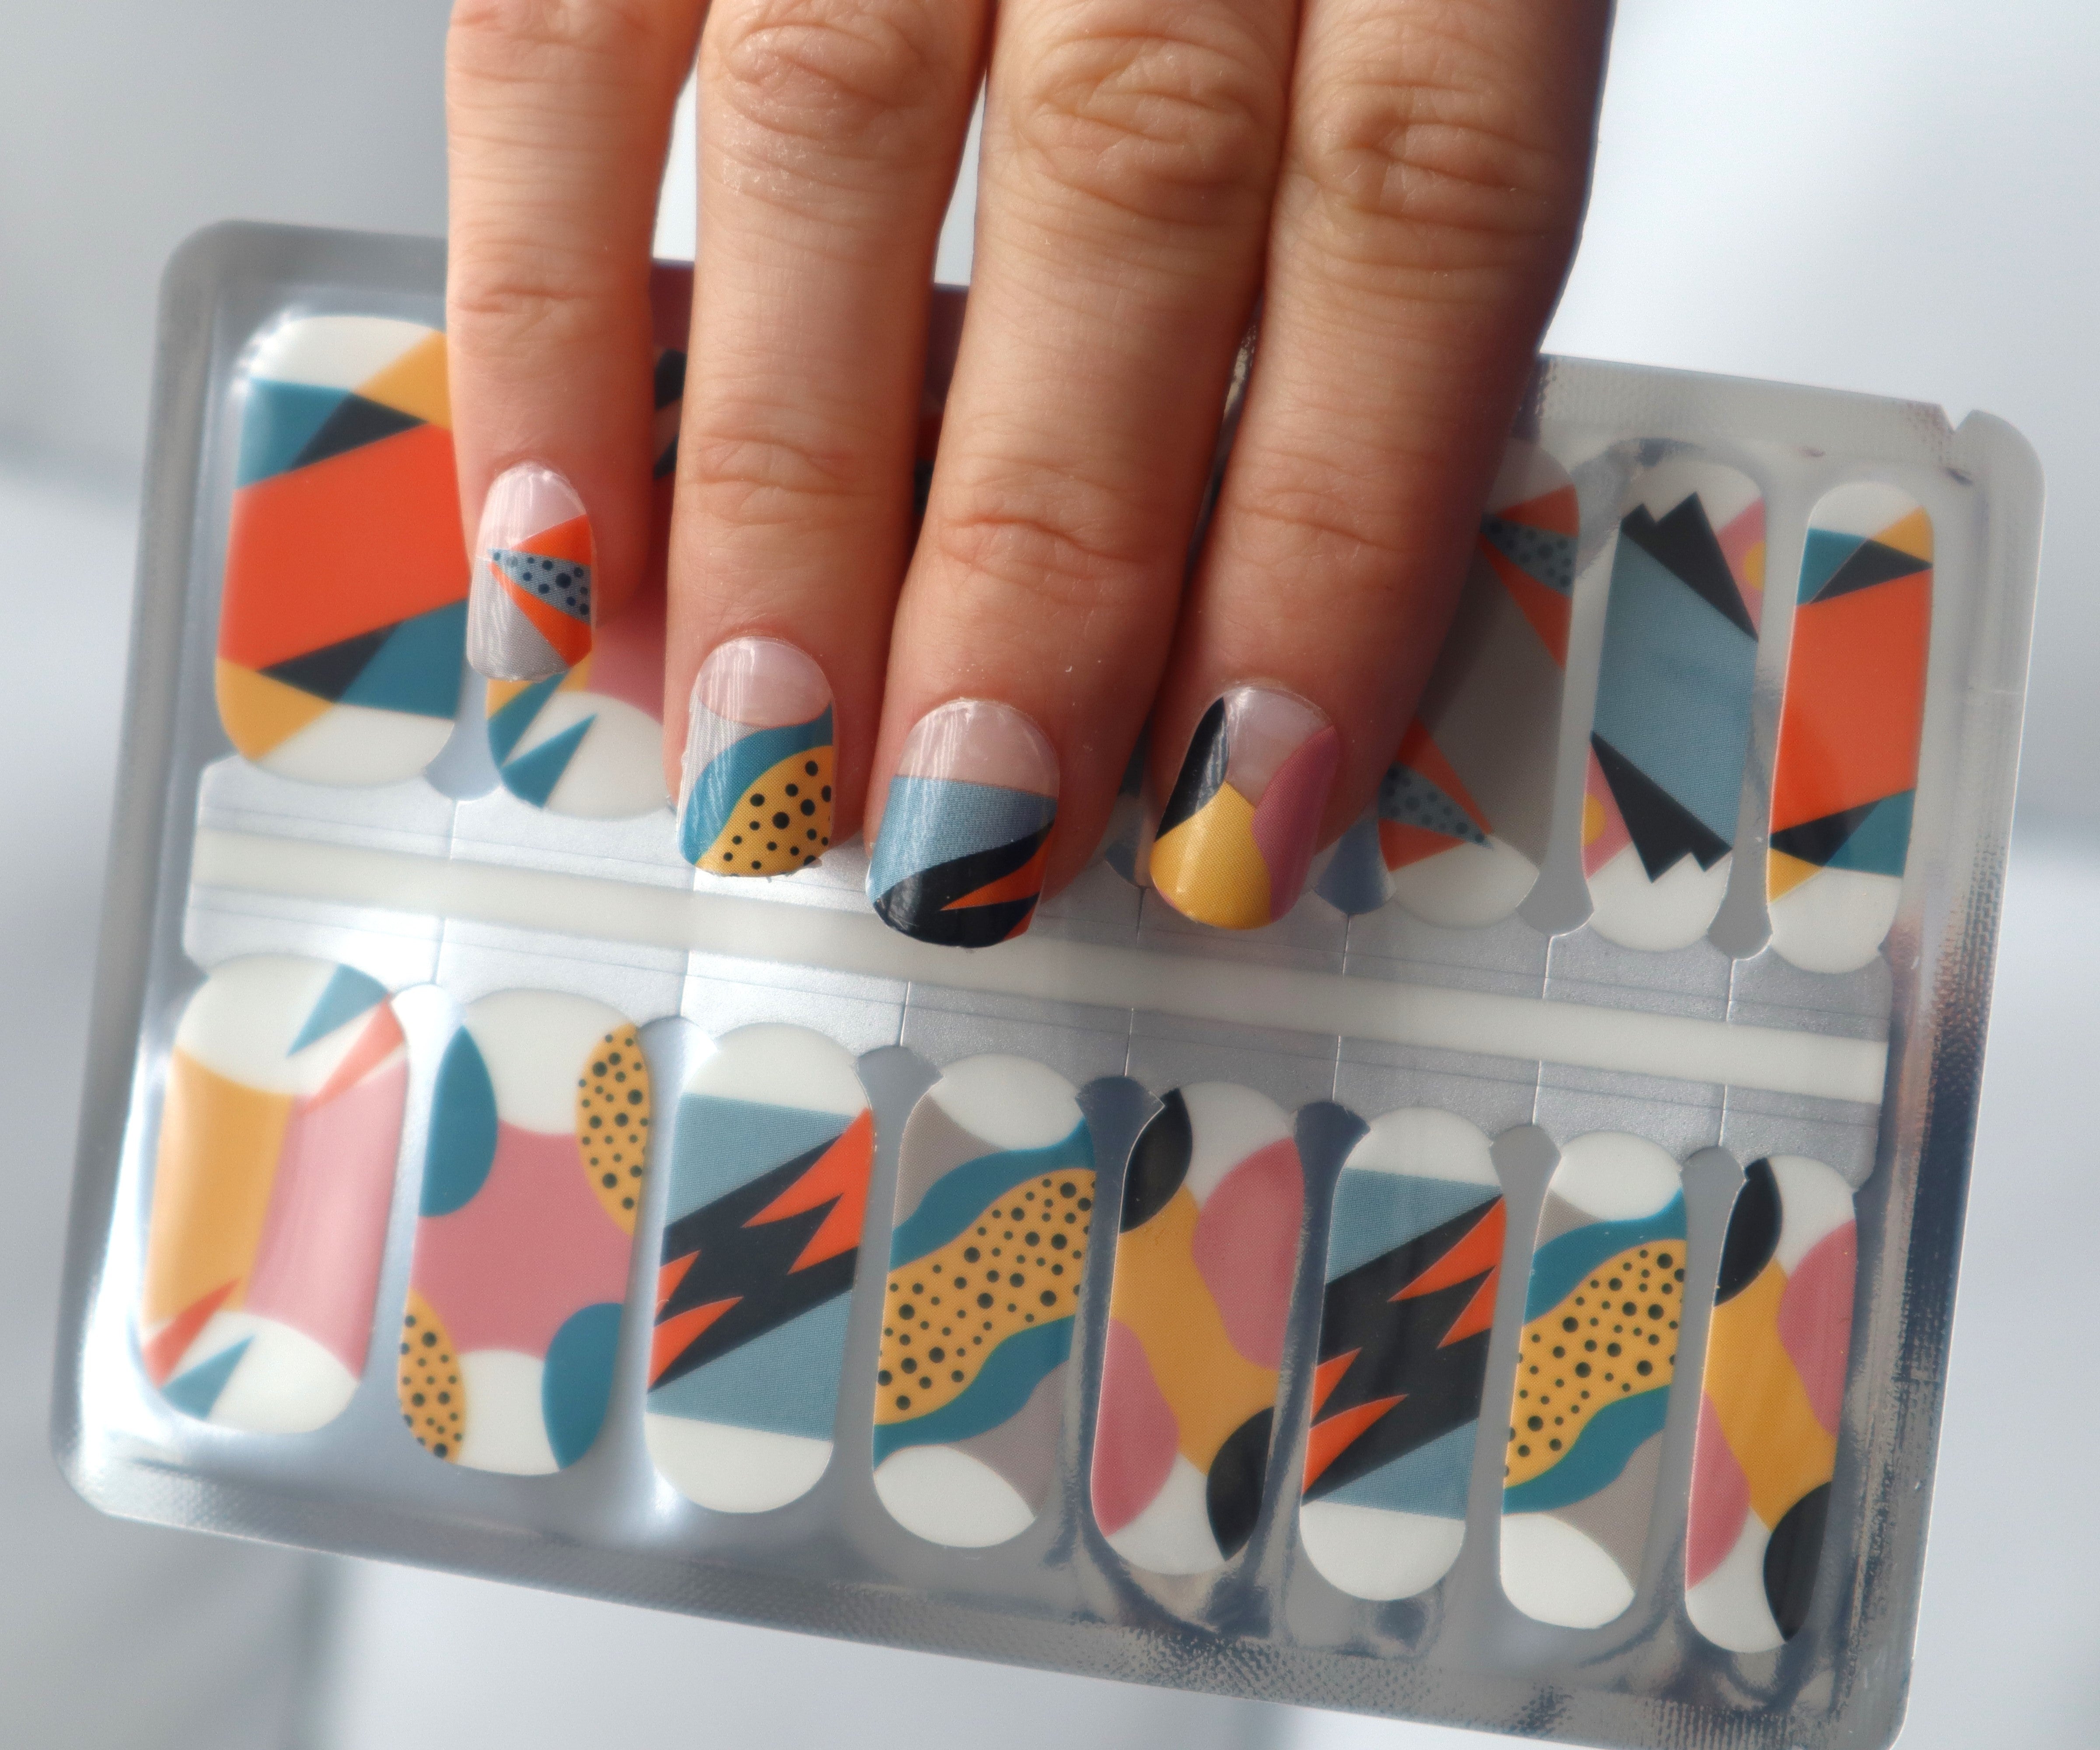 Sizing of the nail wraps